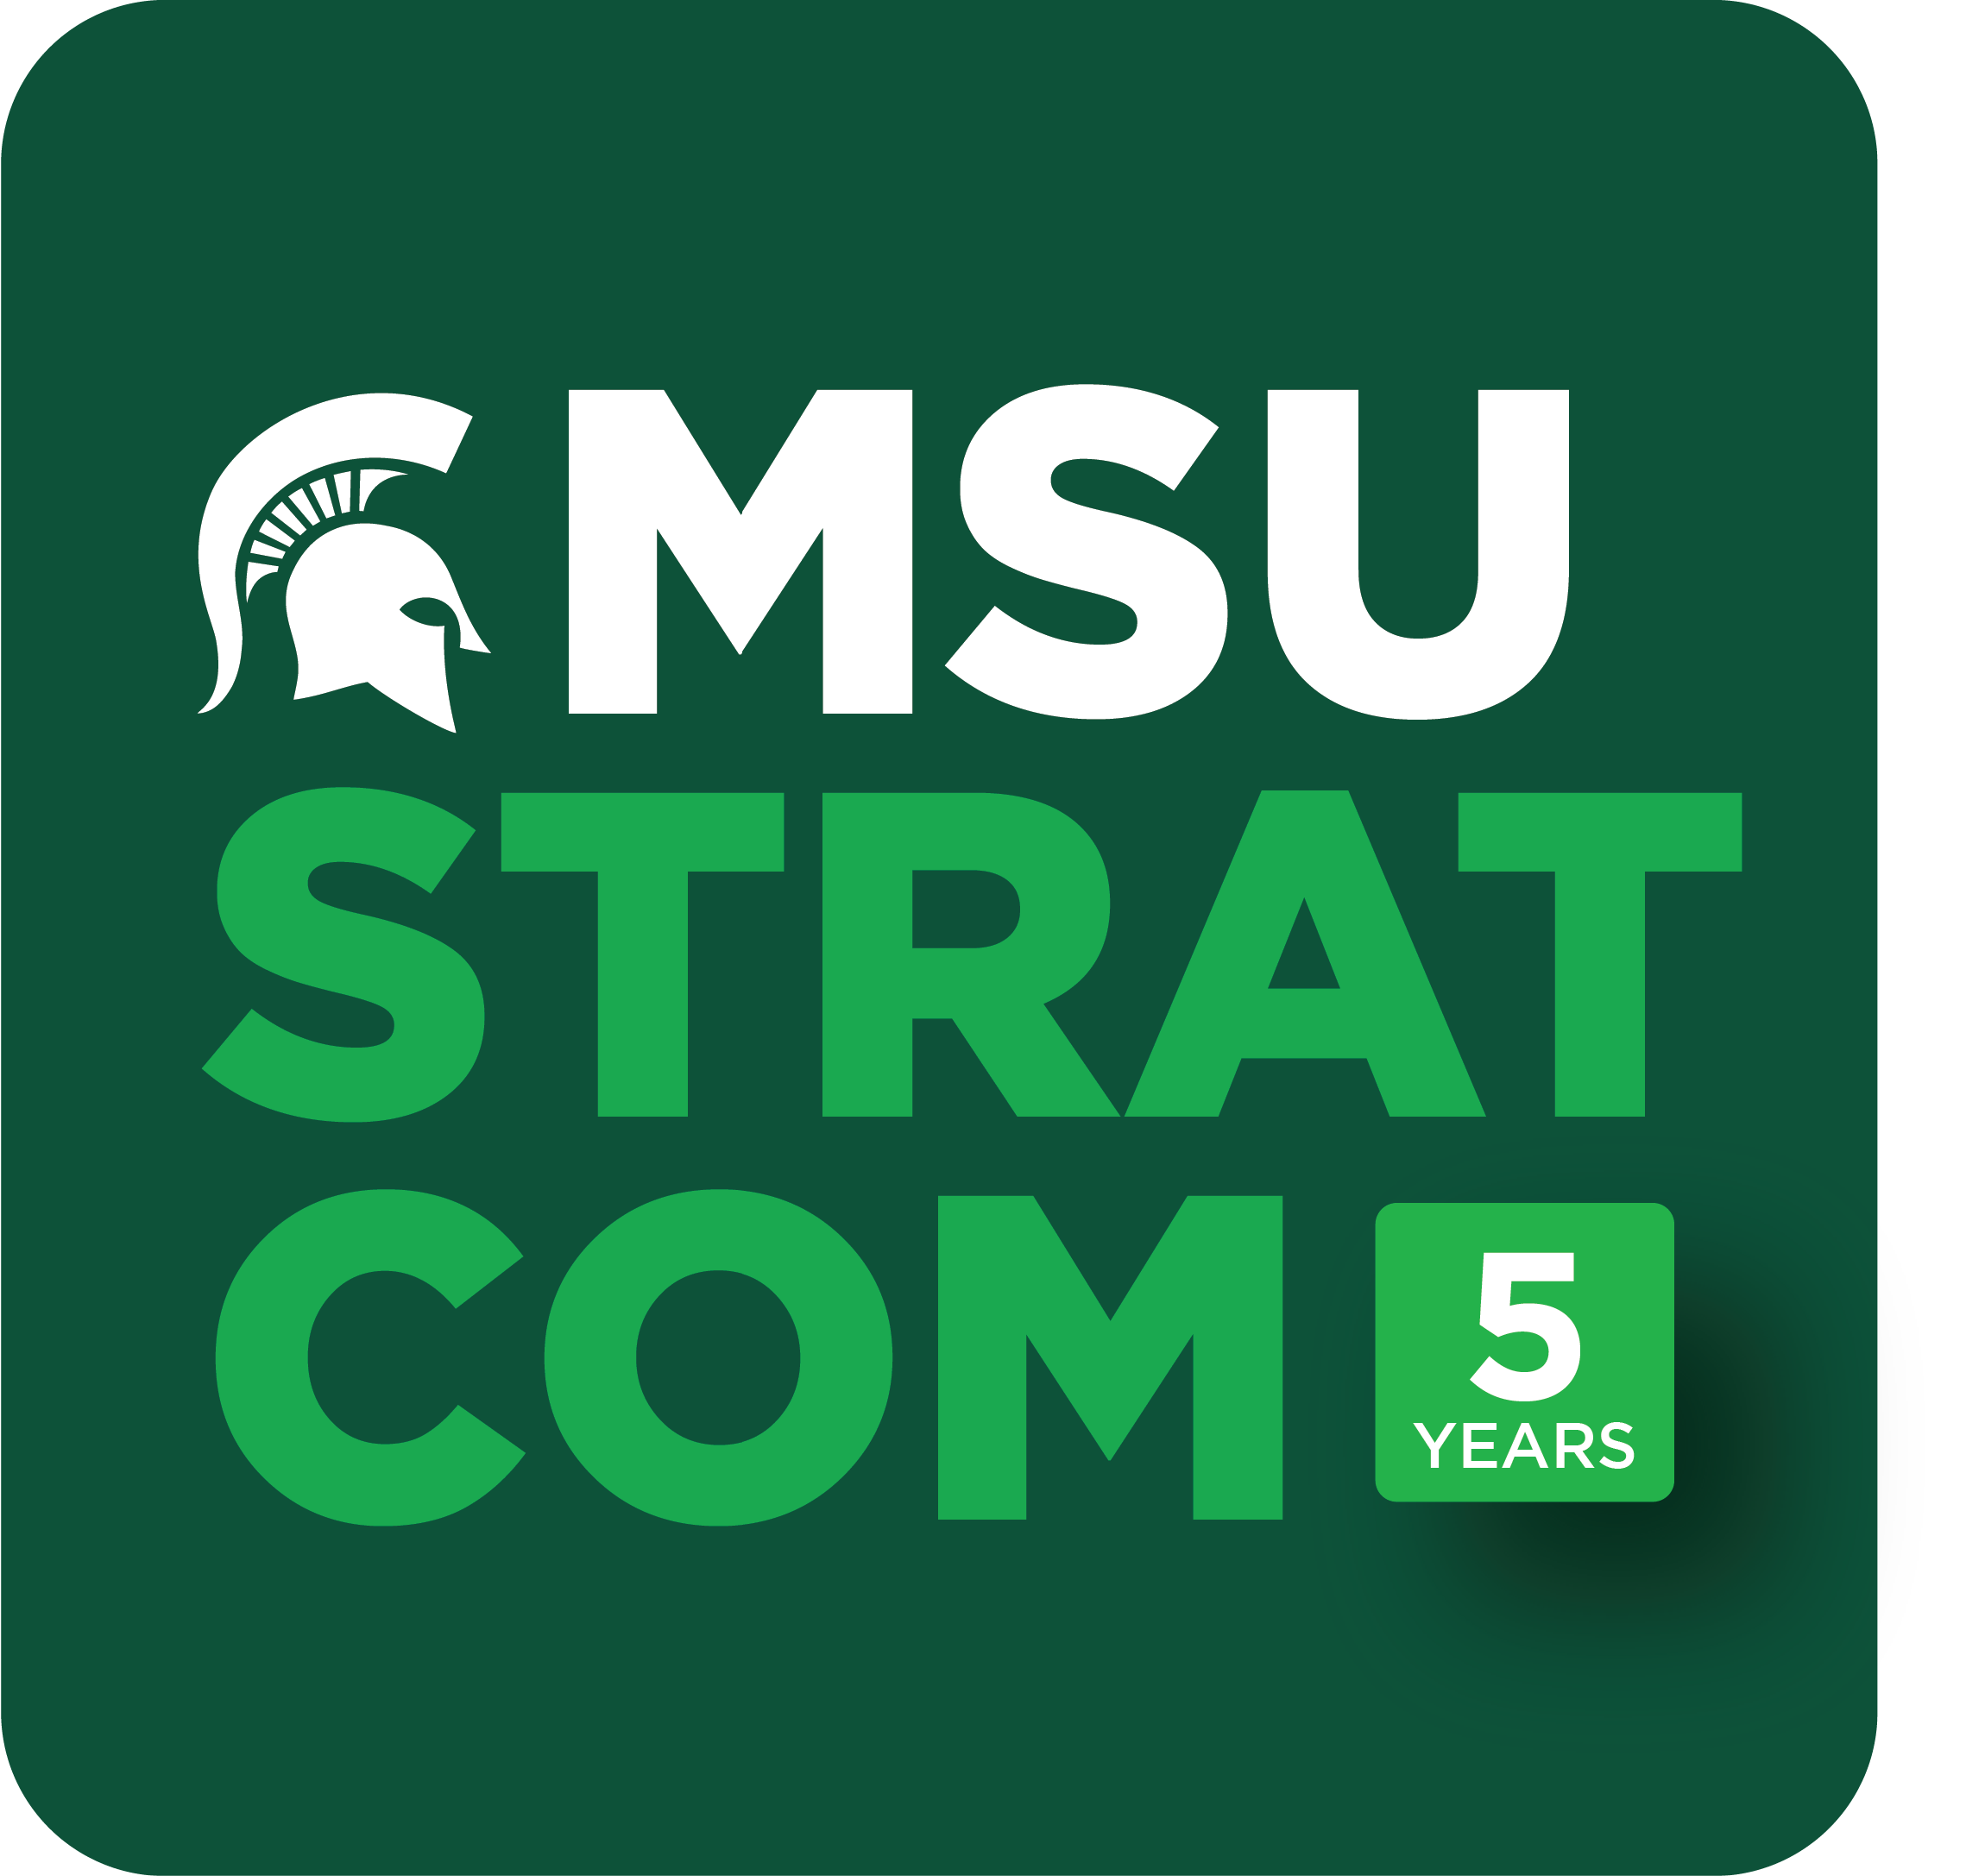 Green square that says MSU StratCom 5 years